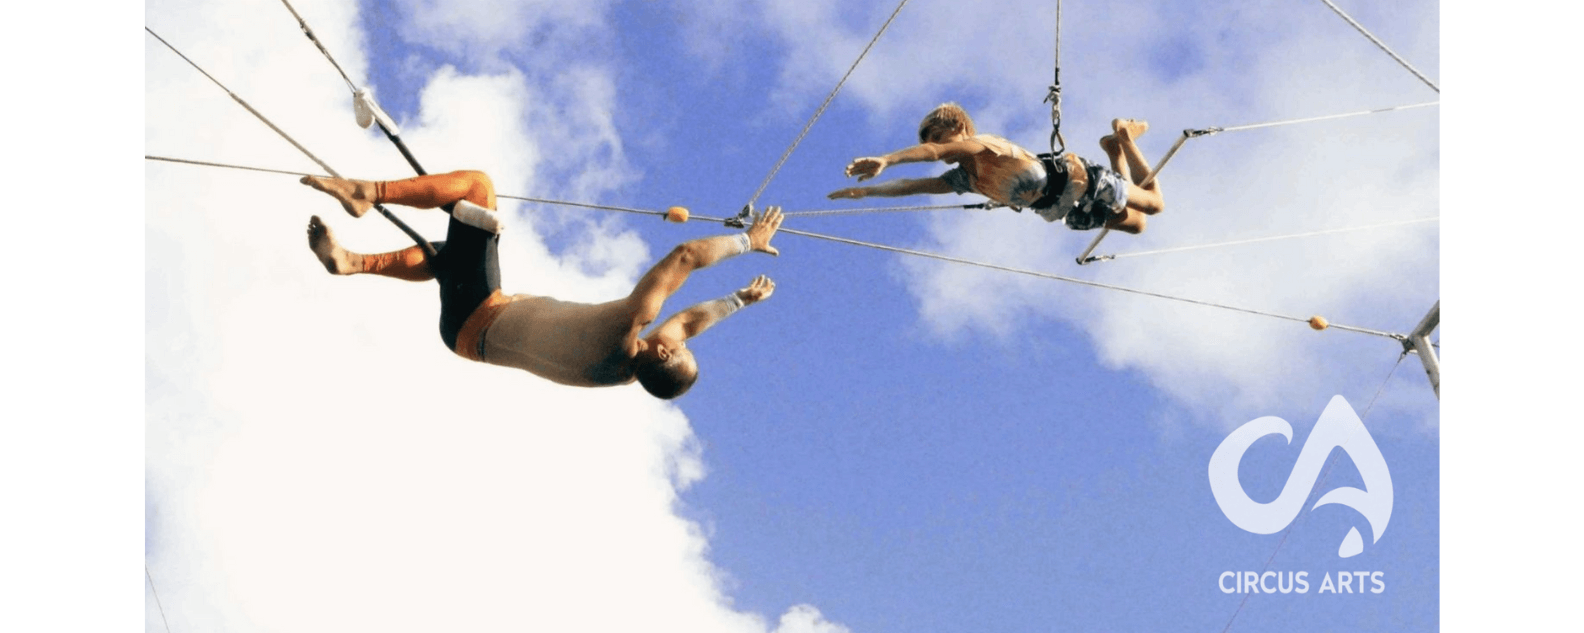 Two people on flying trapeze, sky and clouds in background